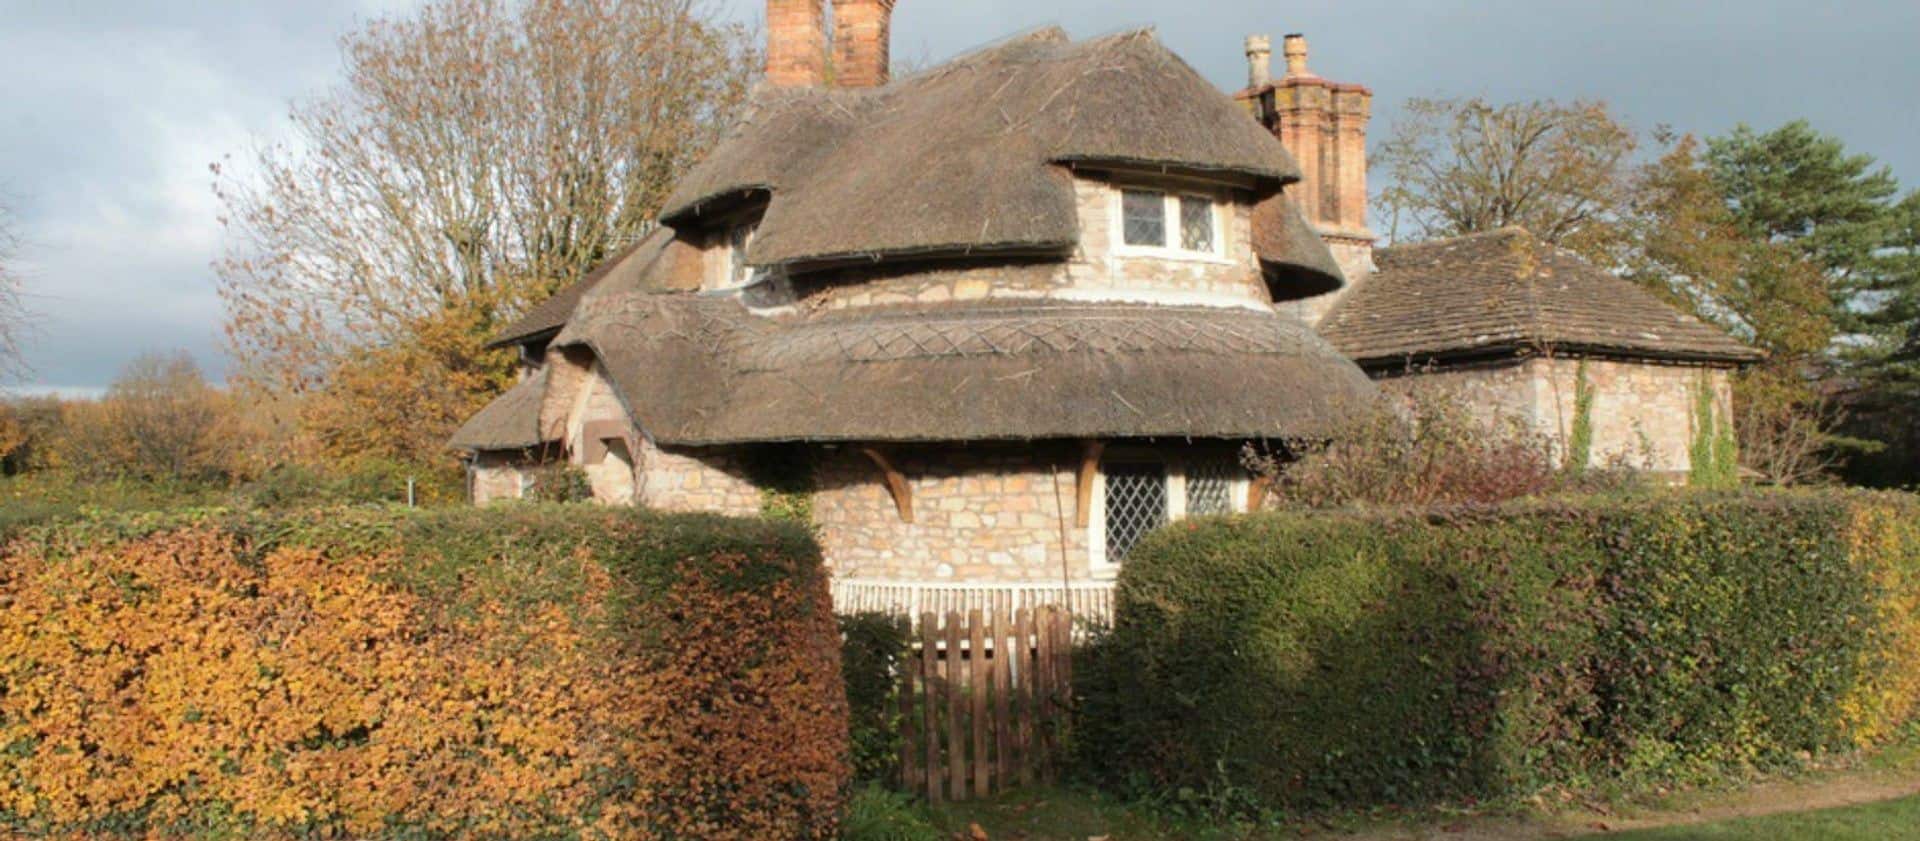 Sweetbriar Cottage in UK